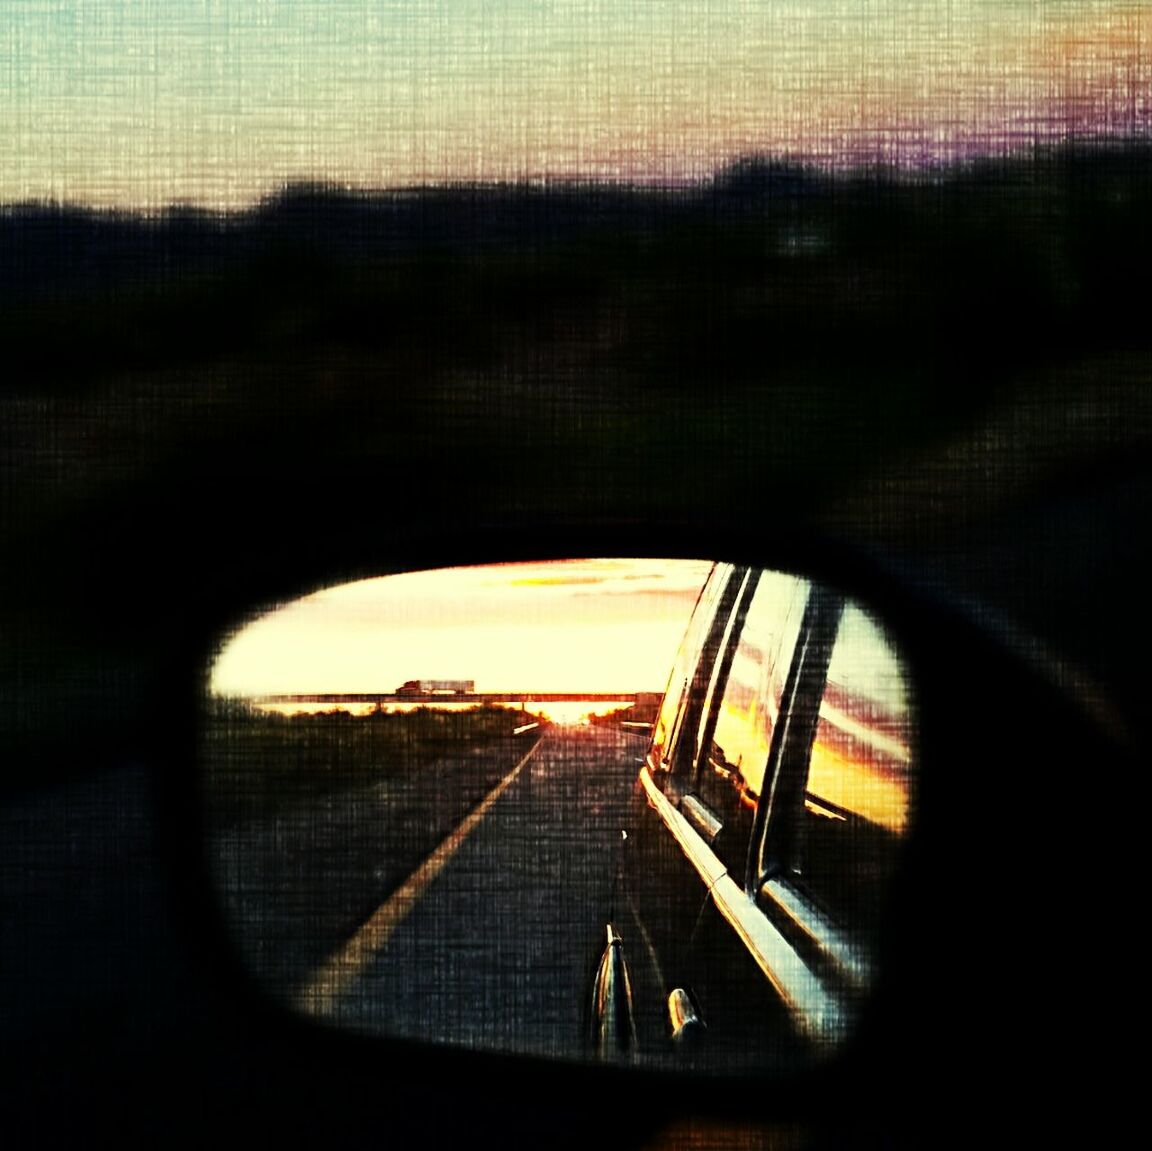 sunset, side-view mirror, window, transportation, mode of transport, indoors, no people, land vehicle, close-up, sky, day, nature